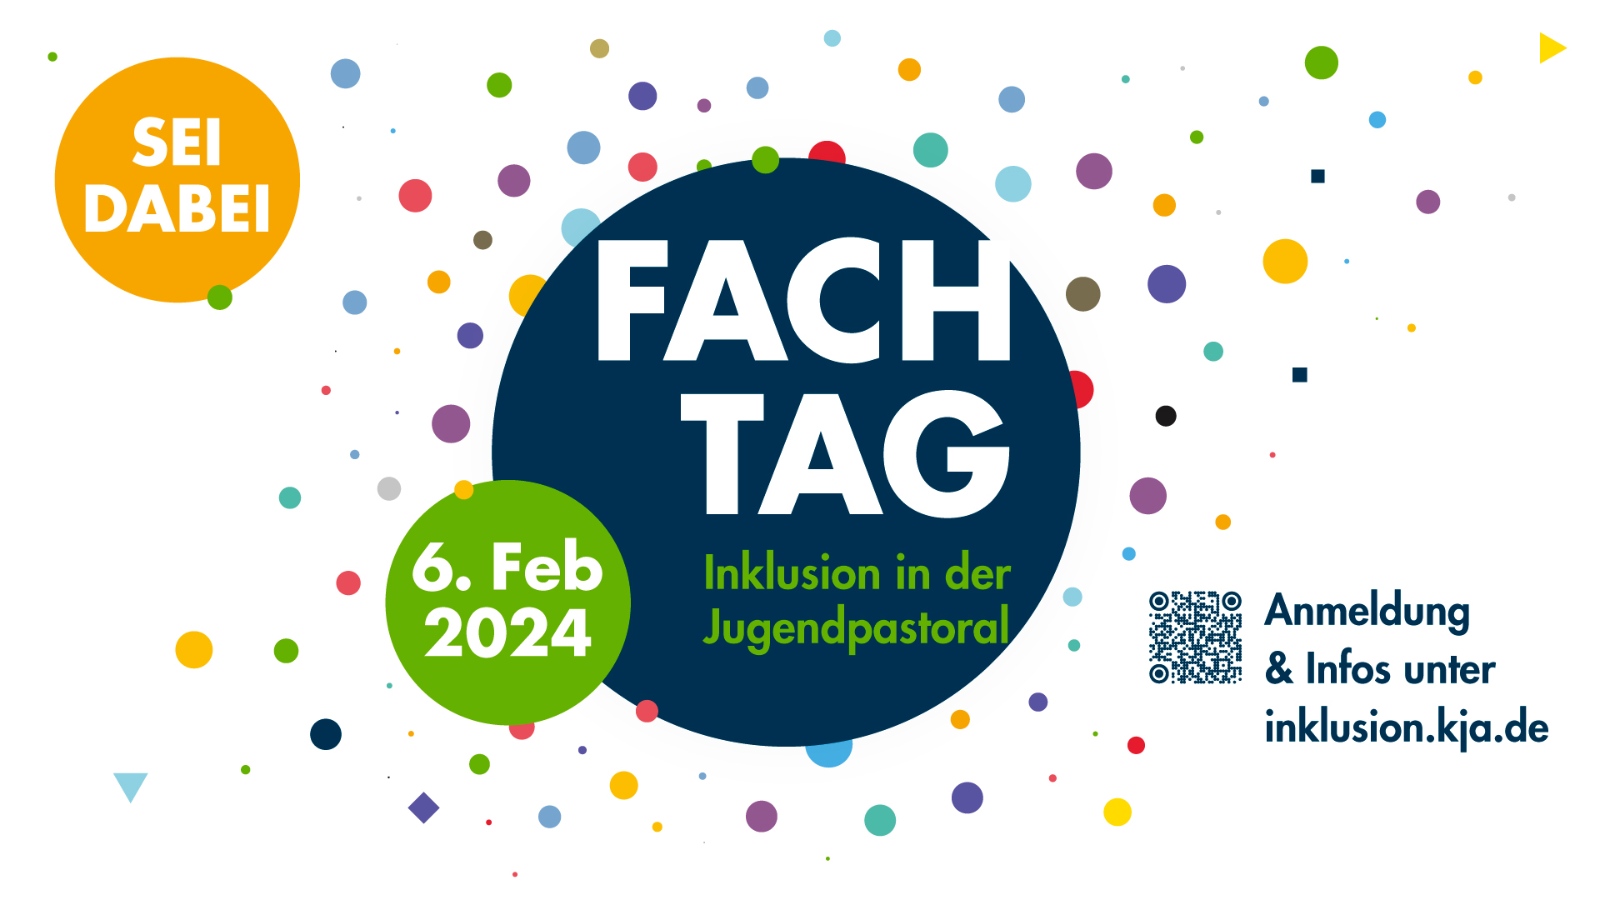 Save the date – Fachtag Inklusion am 6. Februar 2024